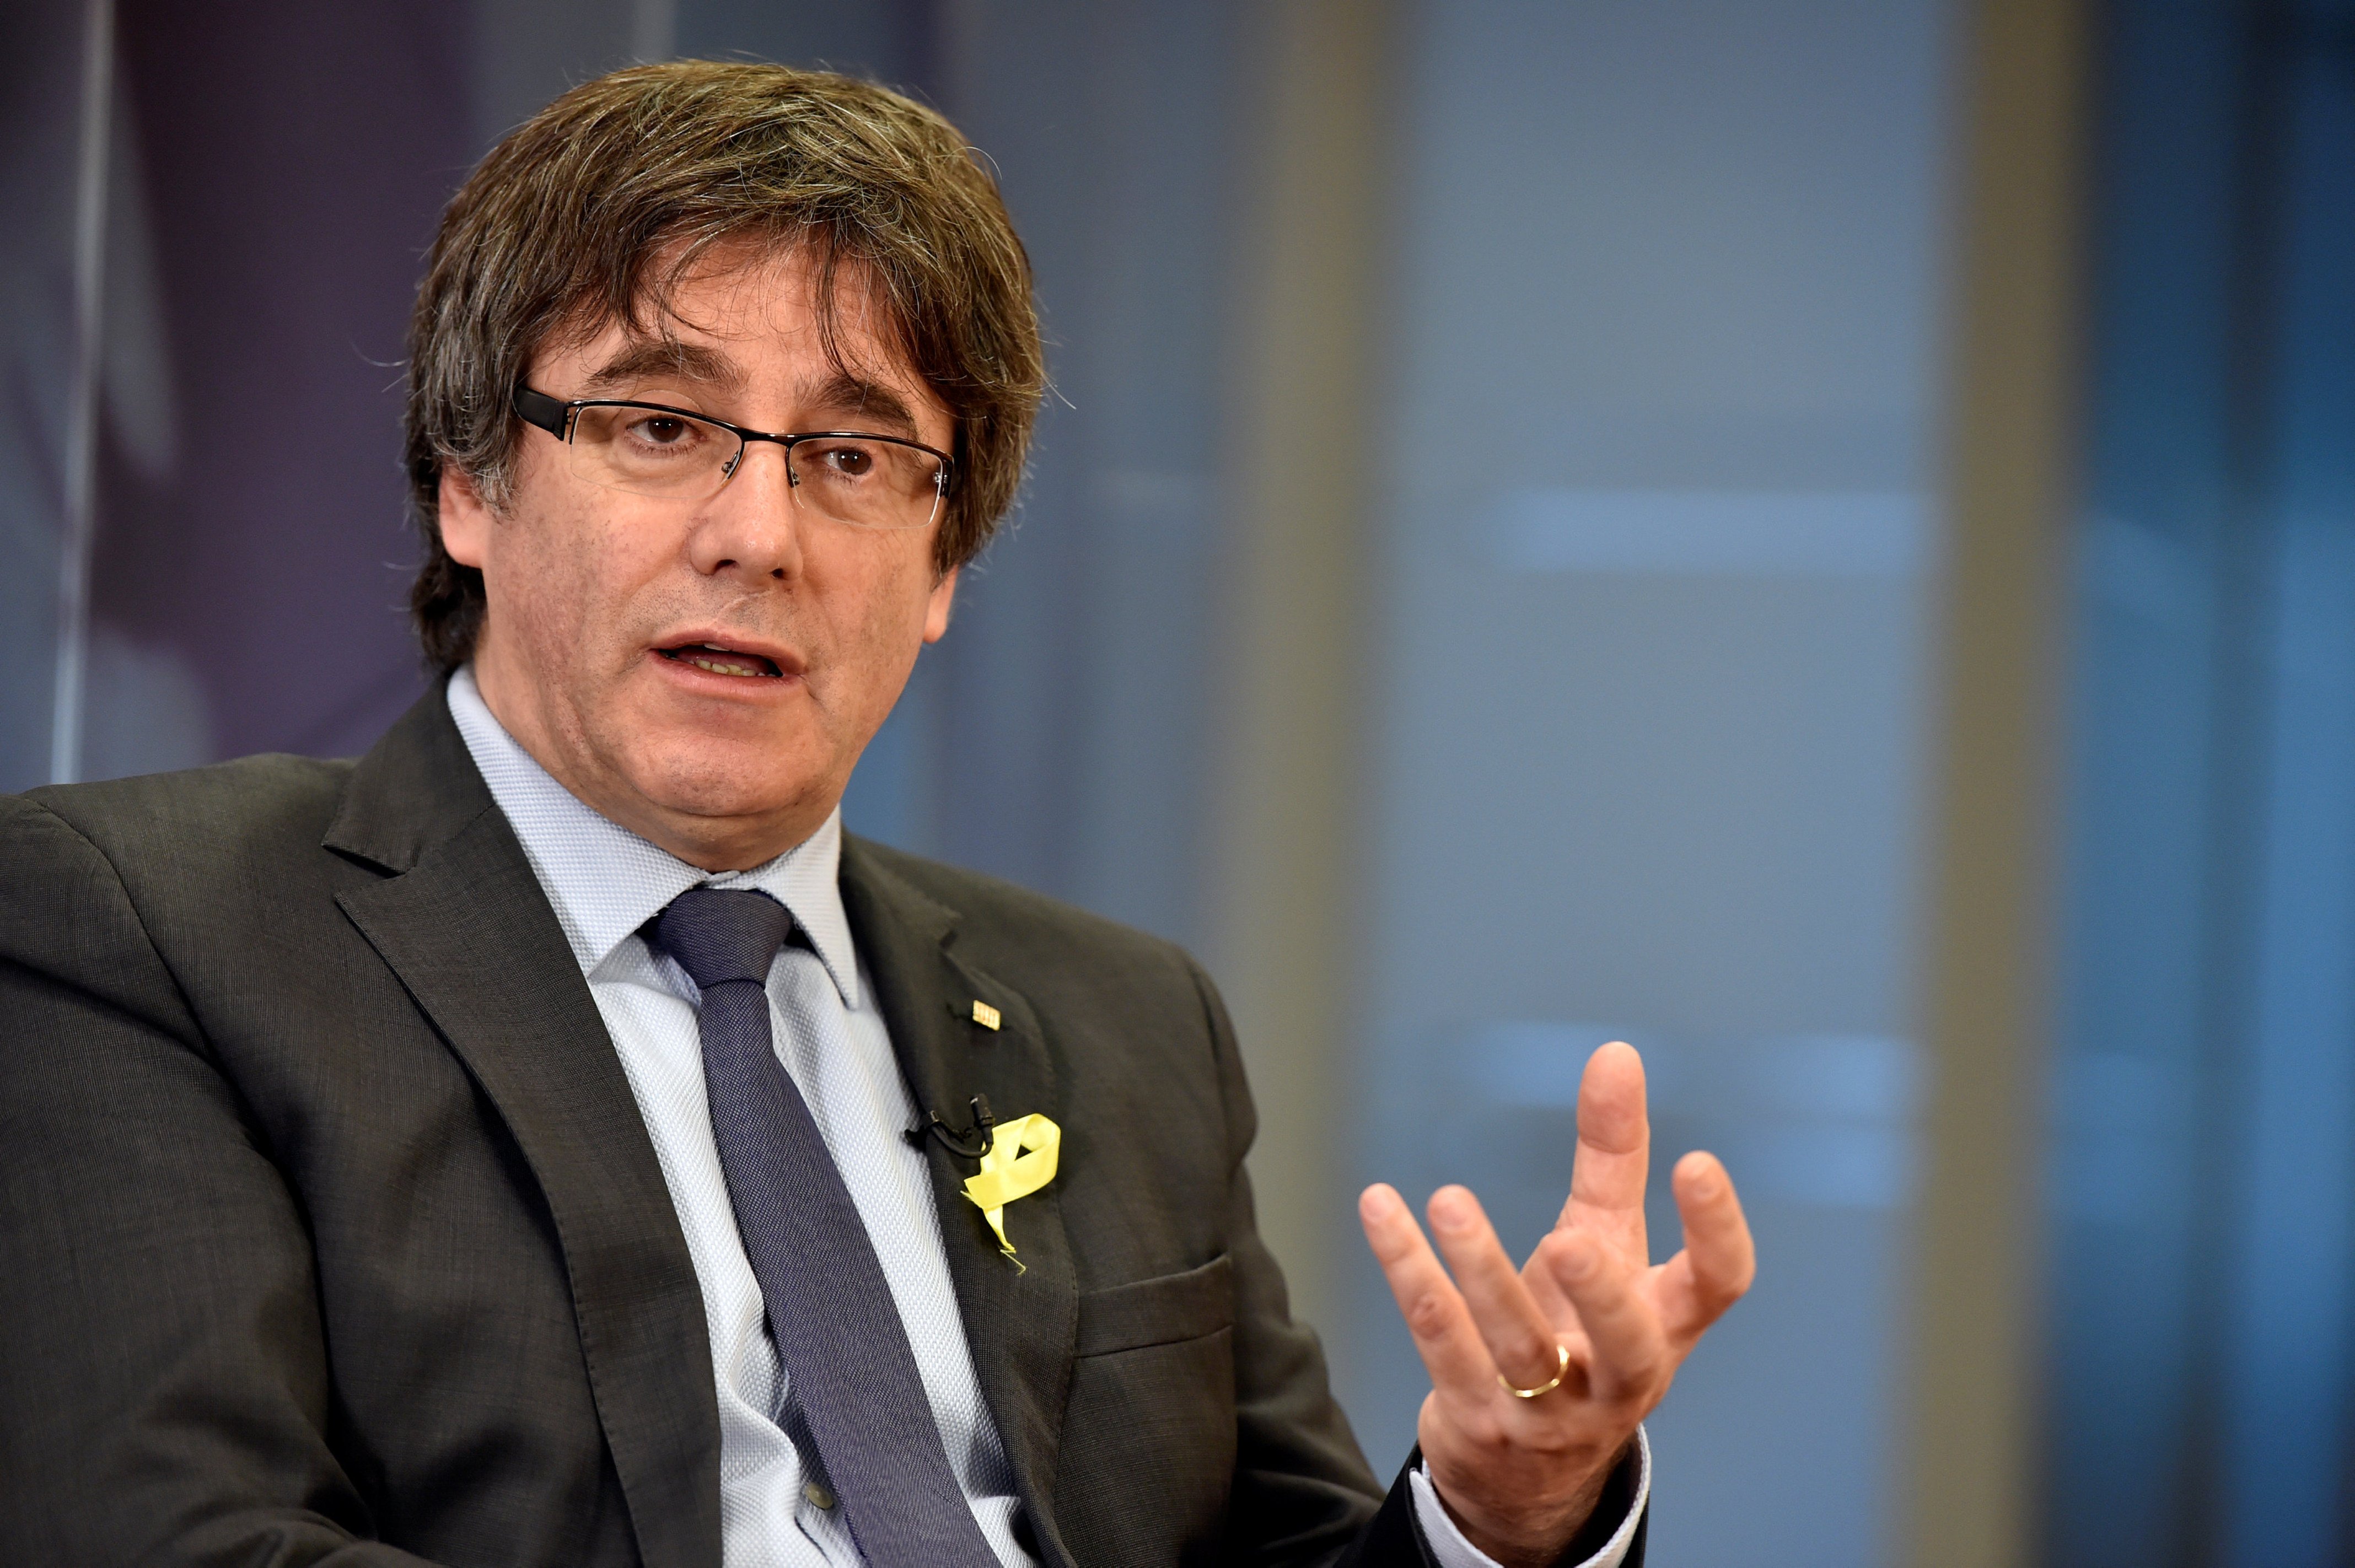 Puigdemont to Reuters: "The king has an opportunity to rectify tomorrow"